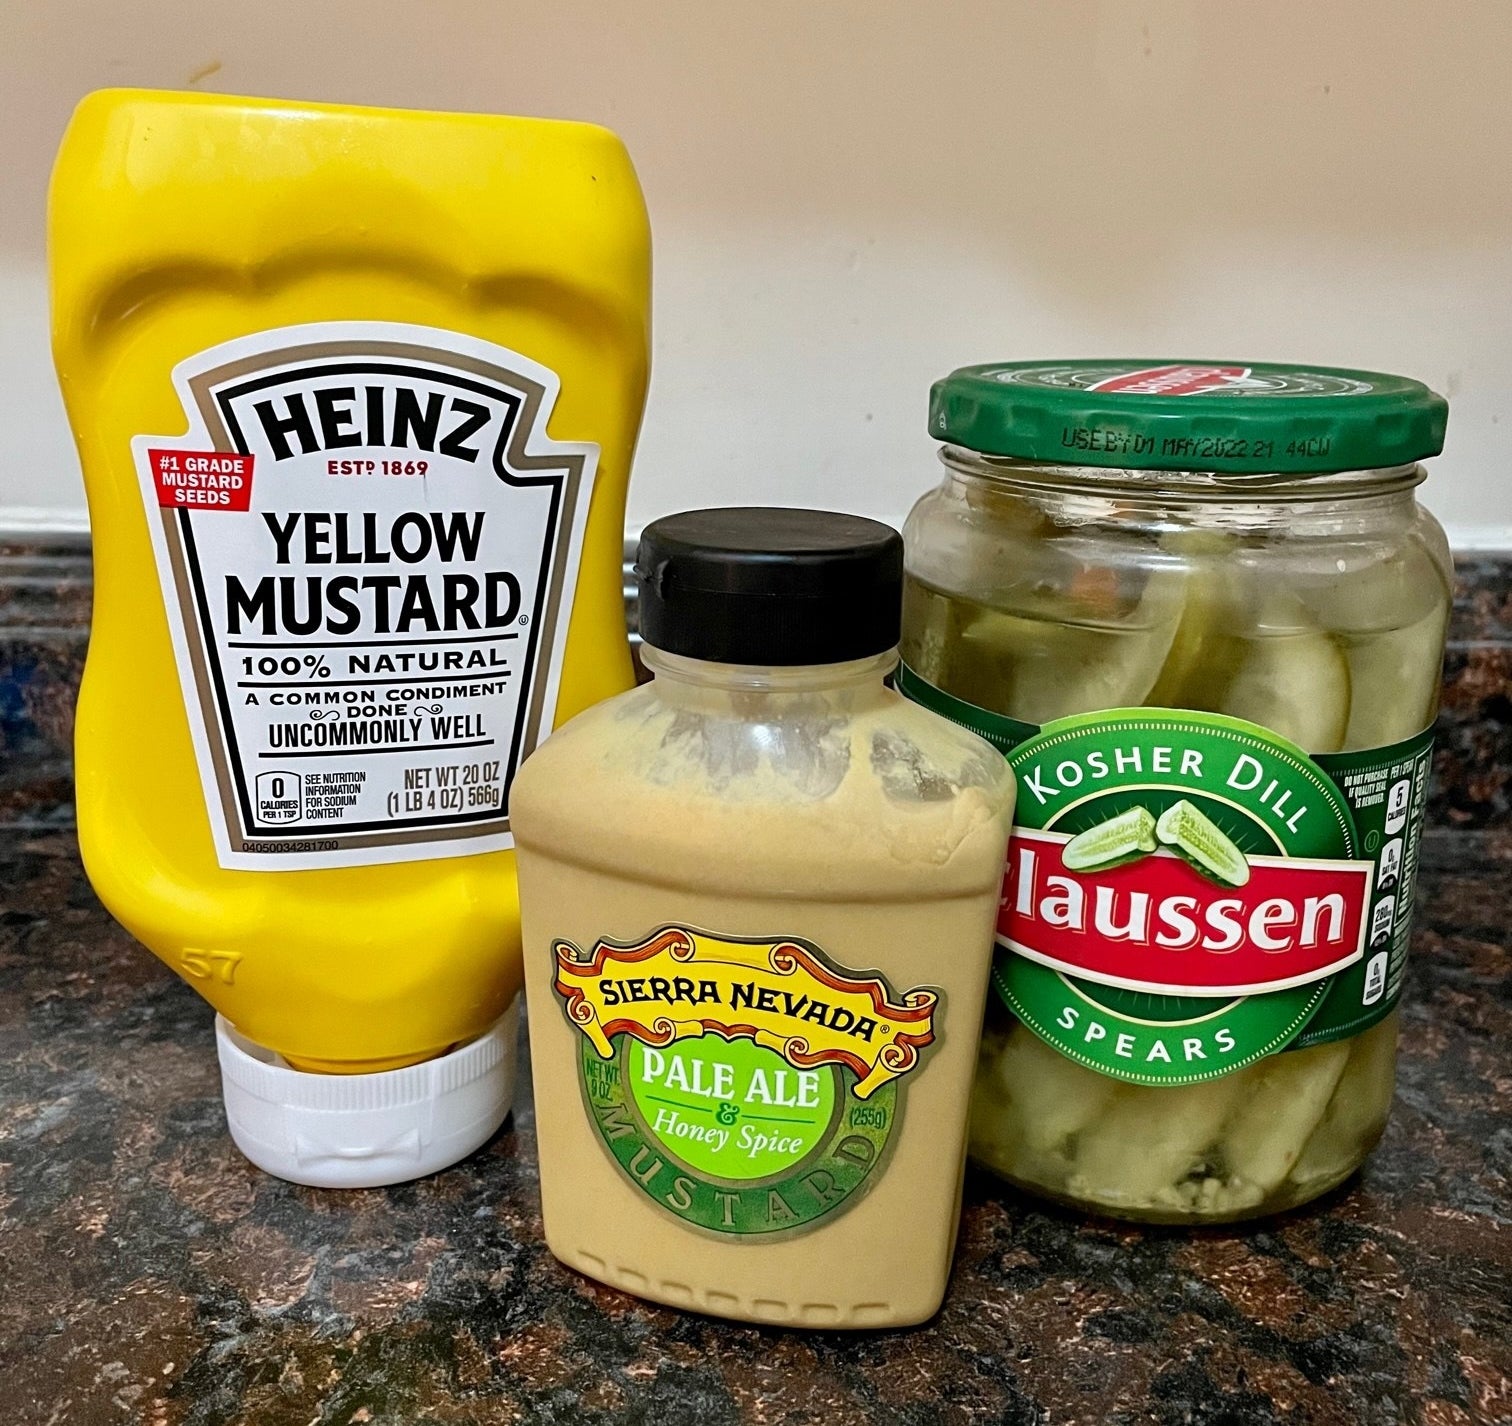 Mustard and pickles